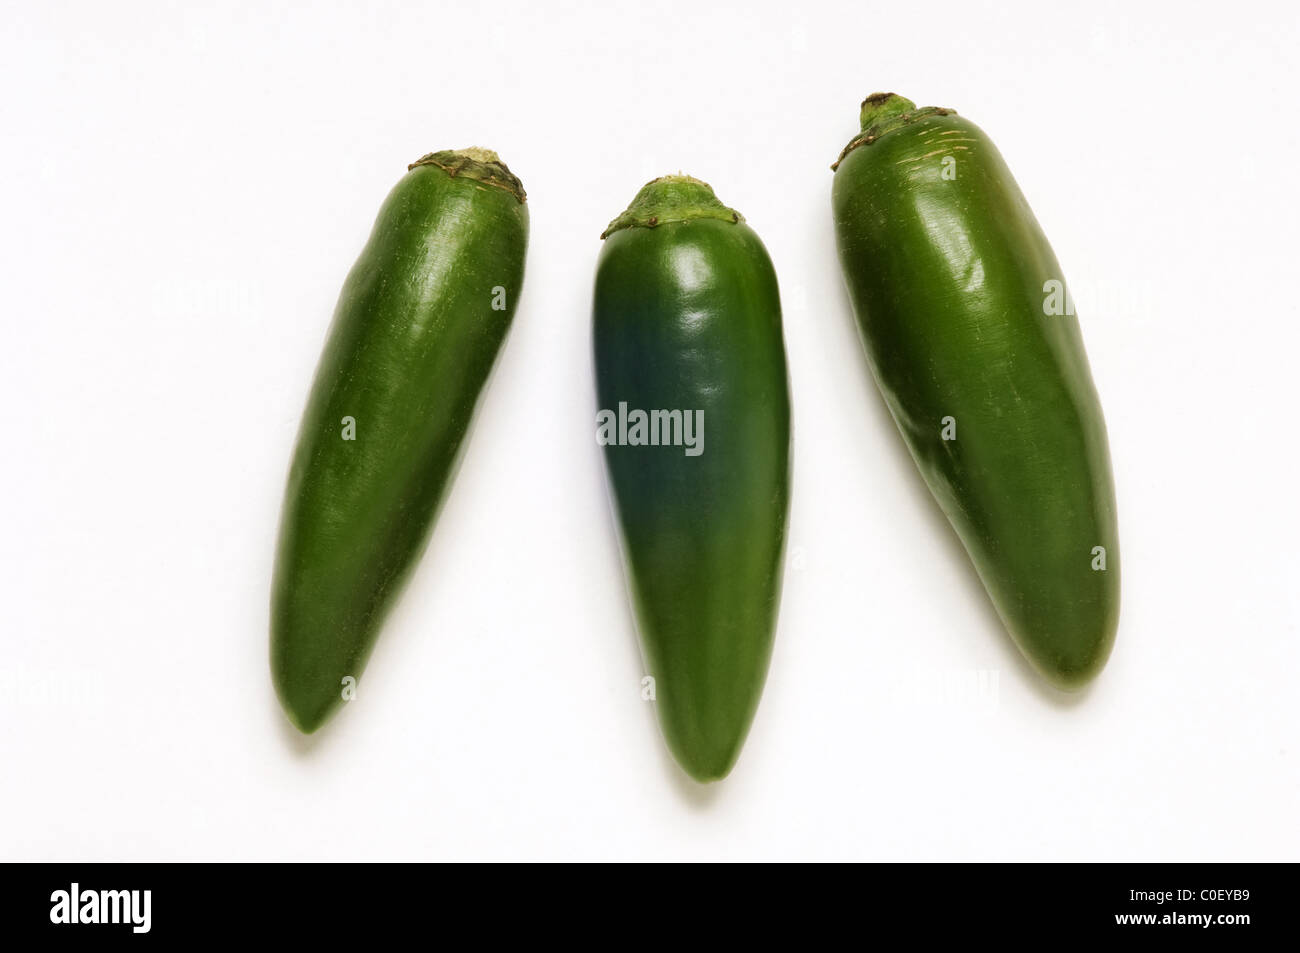 Jalapeno chilli peppers on white background Stock Photo